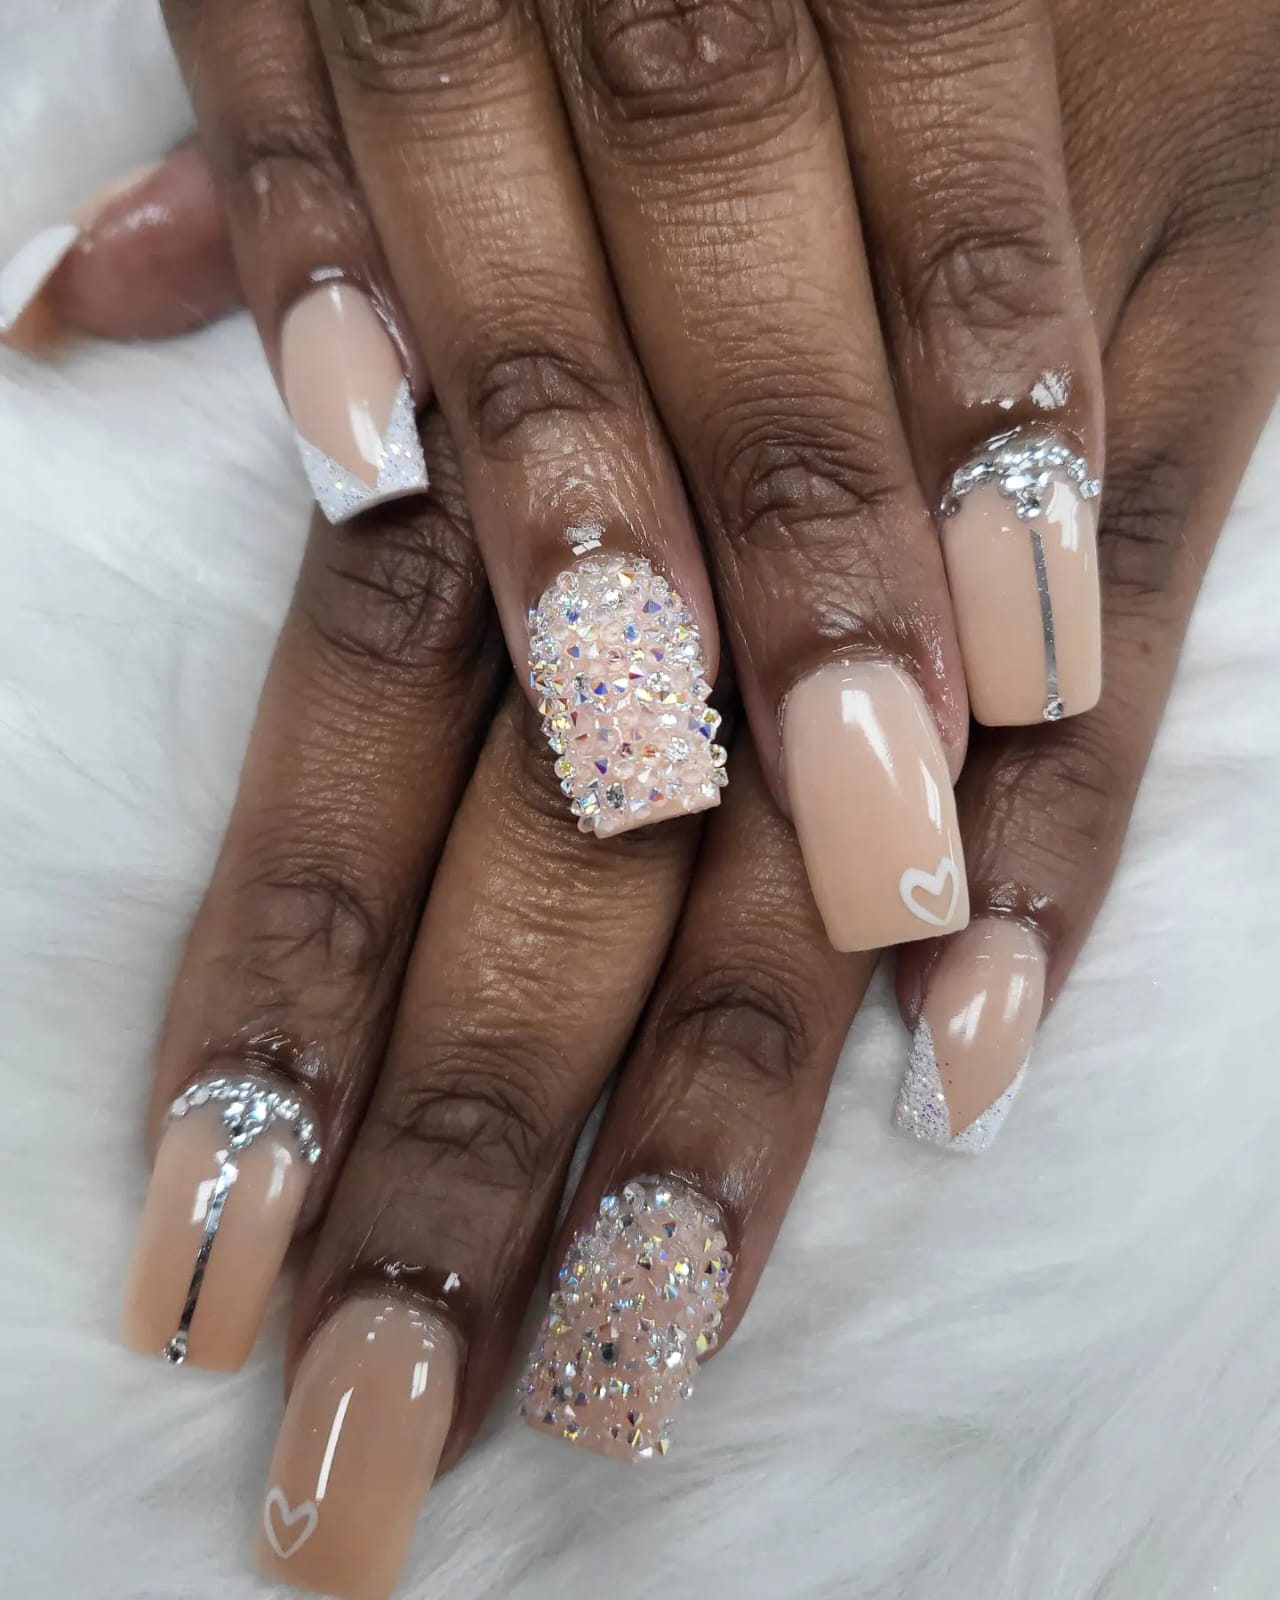 Nail Salons in London - Acrylic, Gel, French Tip, Shellac Nails & More -  London - Wowcher